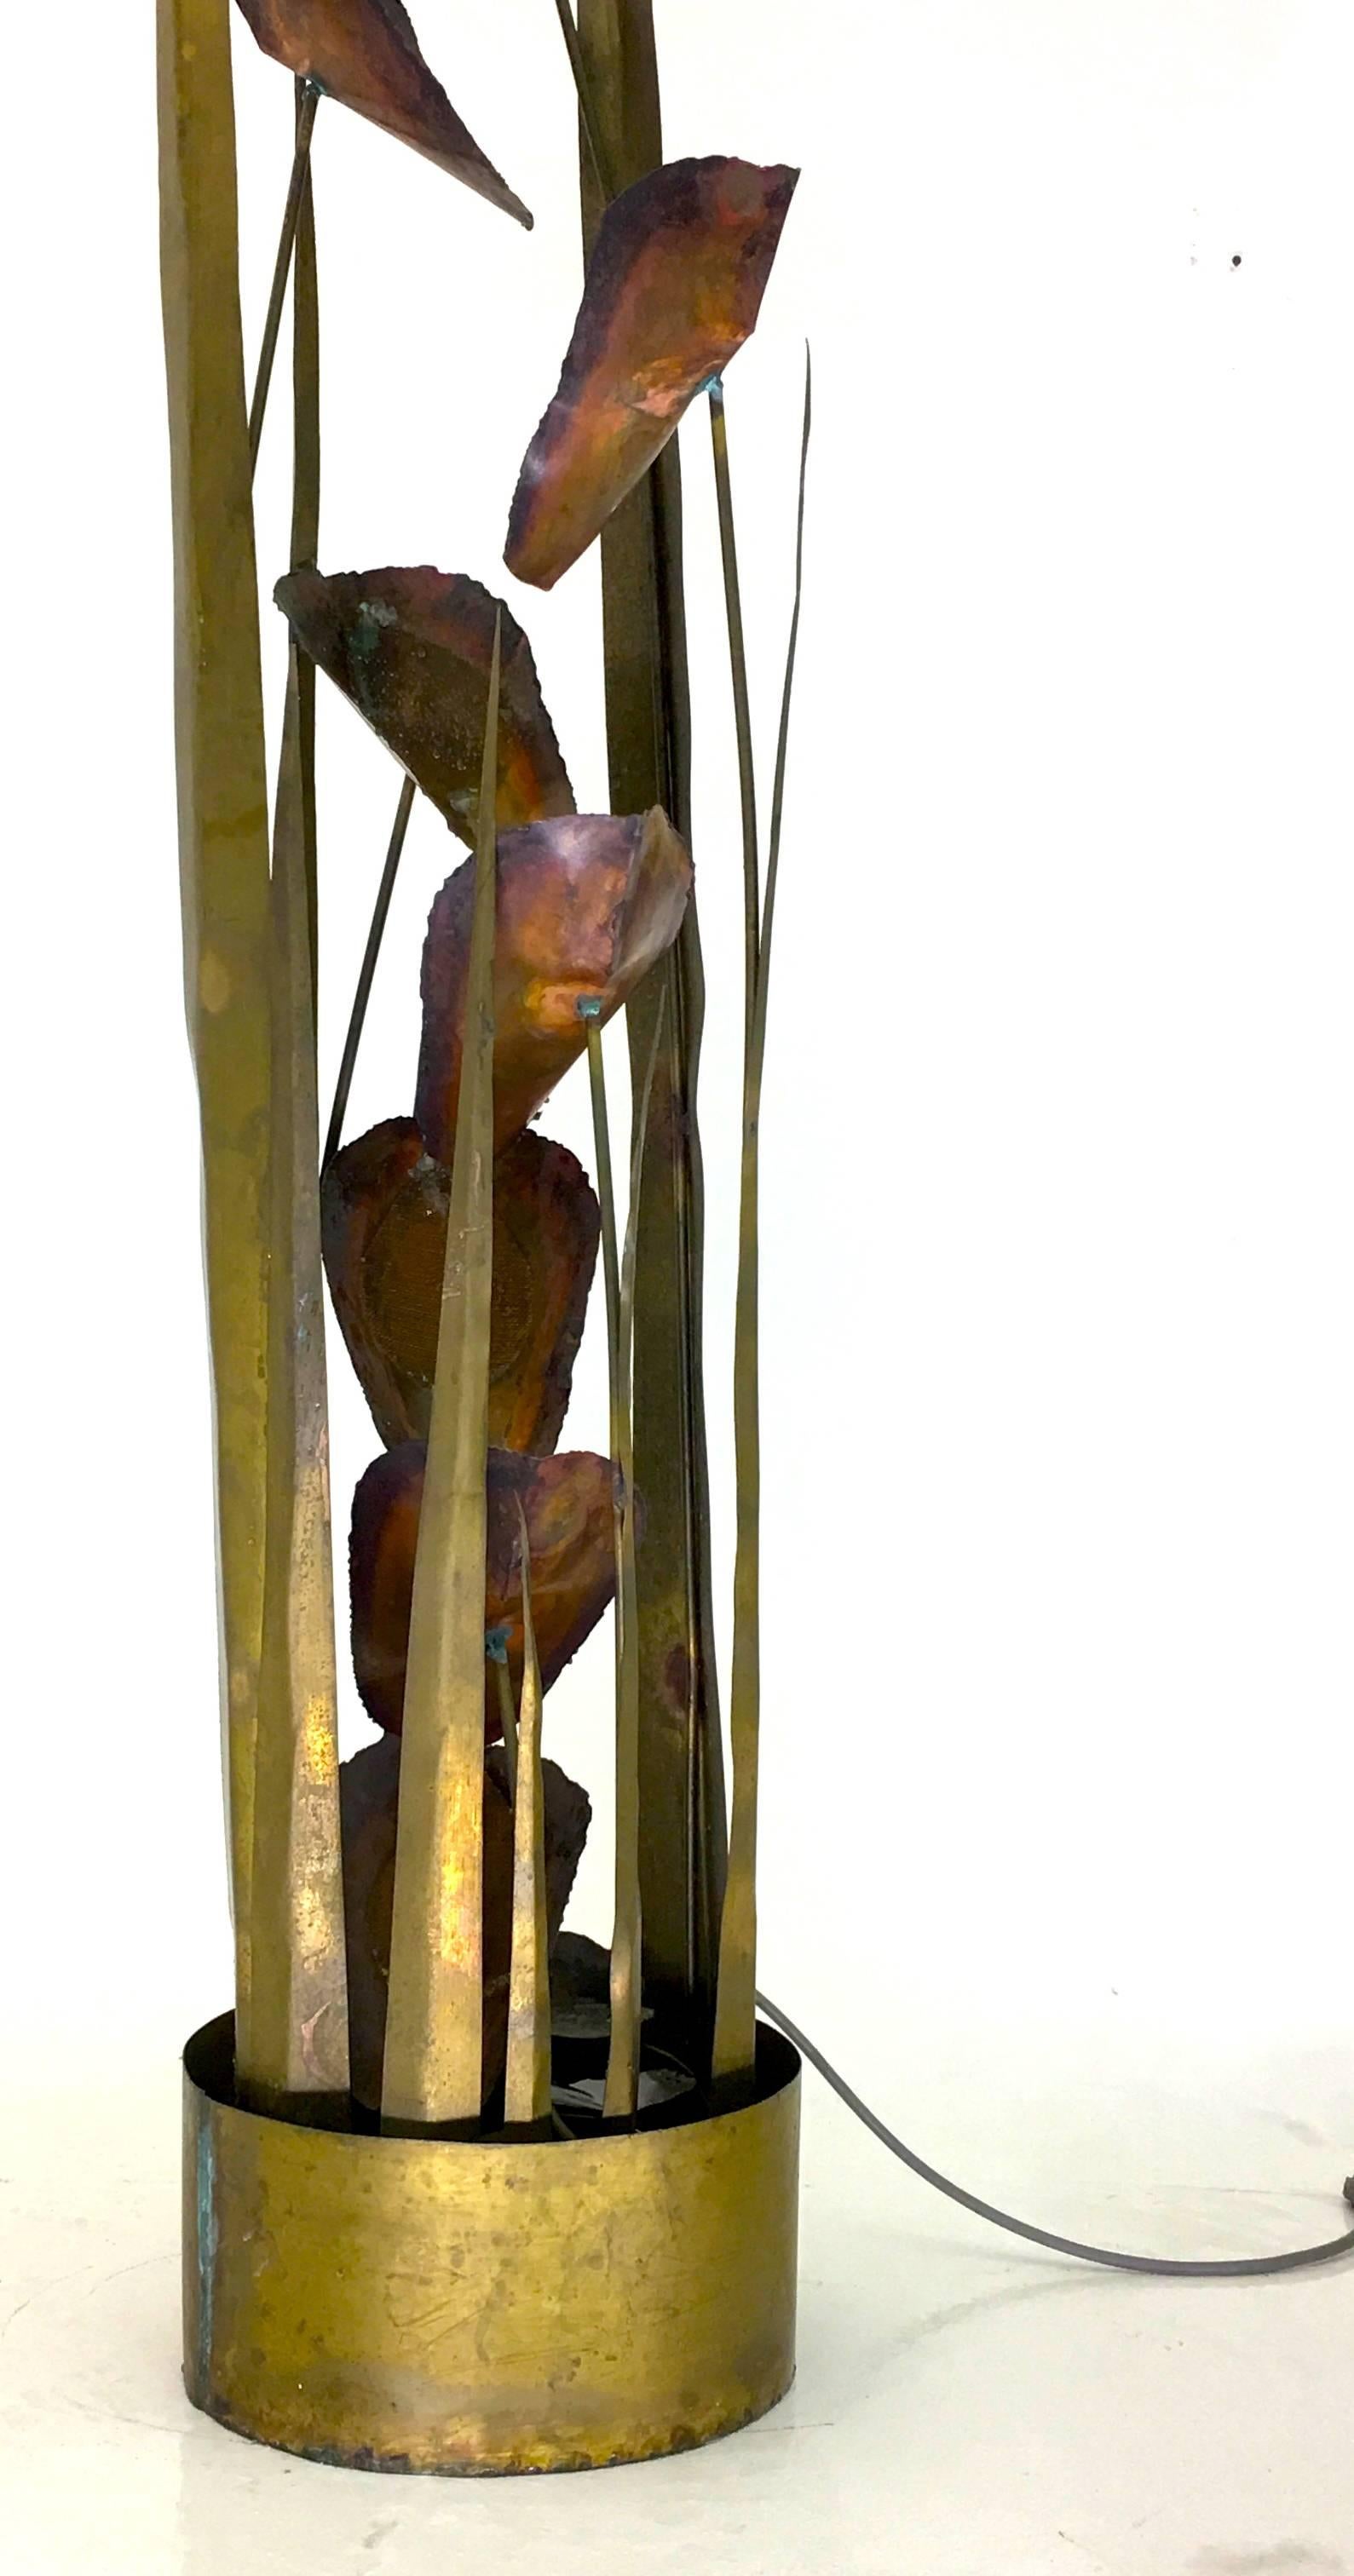 circa 1970
Measures: 72 tall x 14 inches wide.
Silas Seandel


This fully self-contained water fountain by Silas Seandel will be a focal point of any room. Produced circa 1970, a series of cascading water lilies upon stems in copper and carious